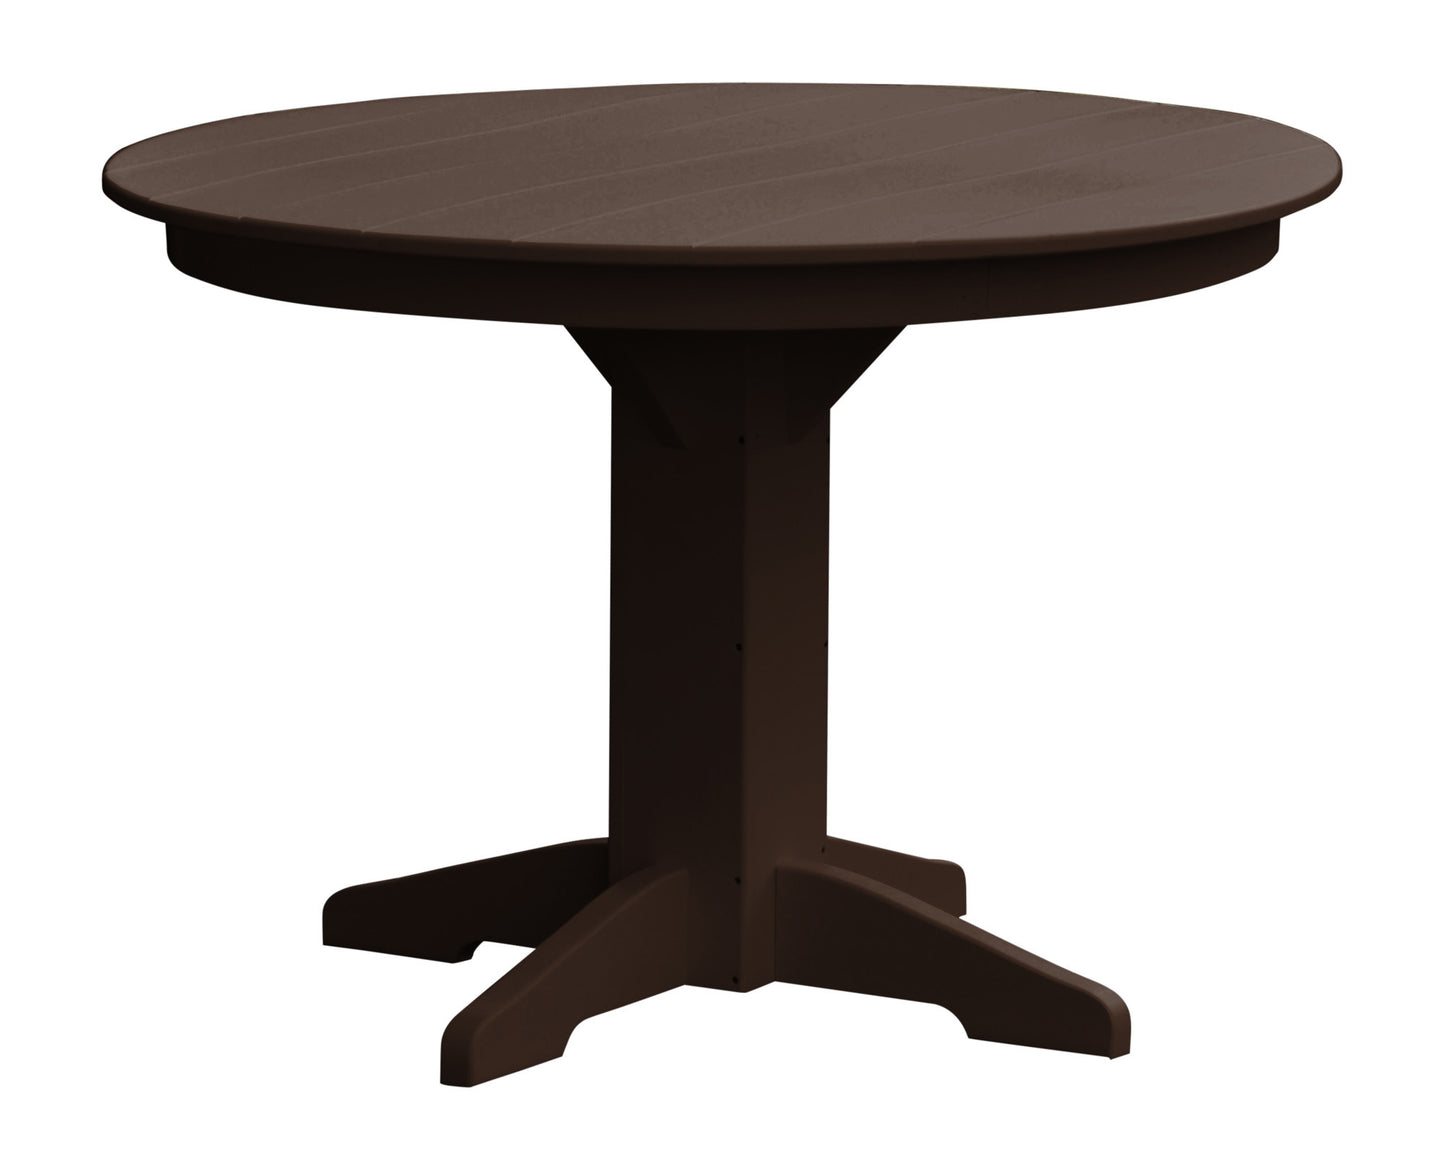 A&L Furniture Recycled Plastic 44" Round Dining Table - Tudor Brown